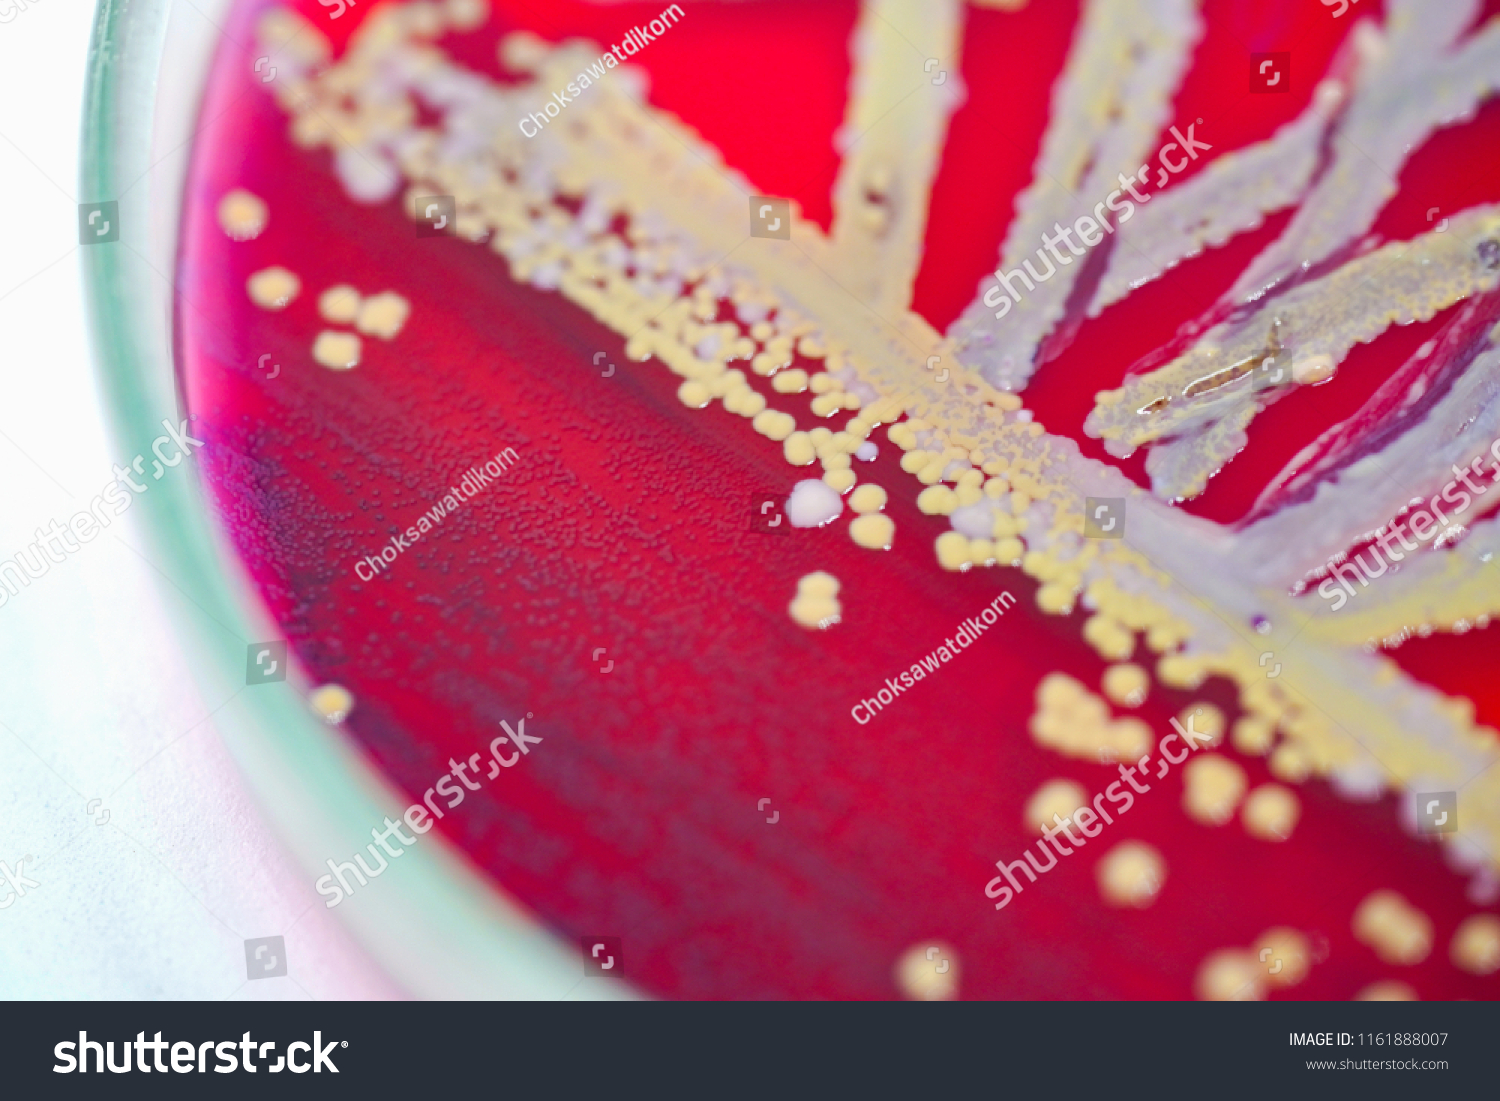 Colony Bacteria Culture Medium Plate Microbiology Stock Photo Shutterstock